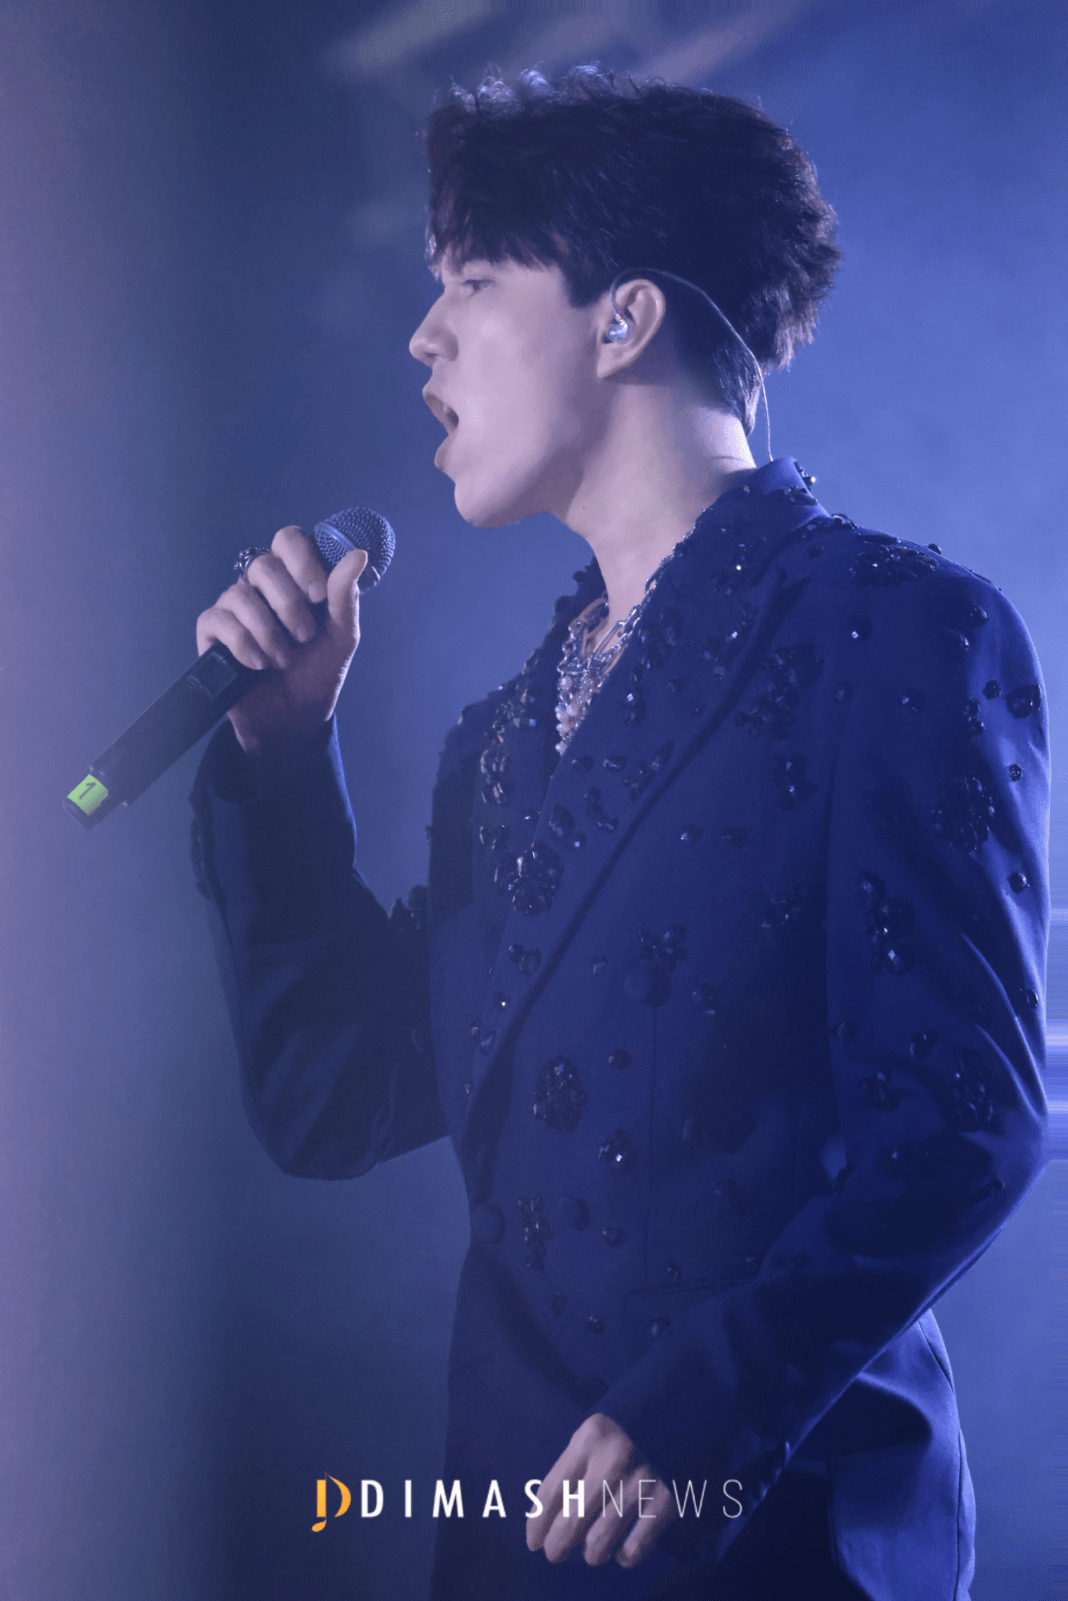 Dimash Headlined the EXIT Festival in Serbia